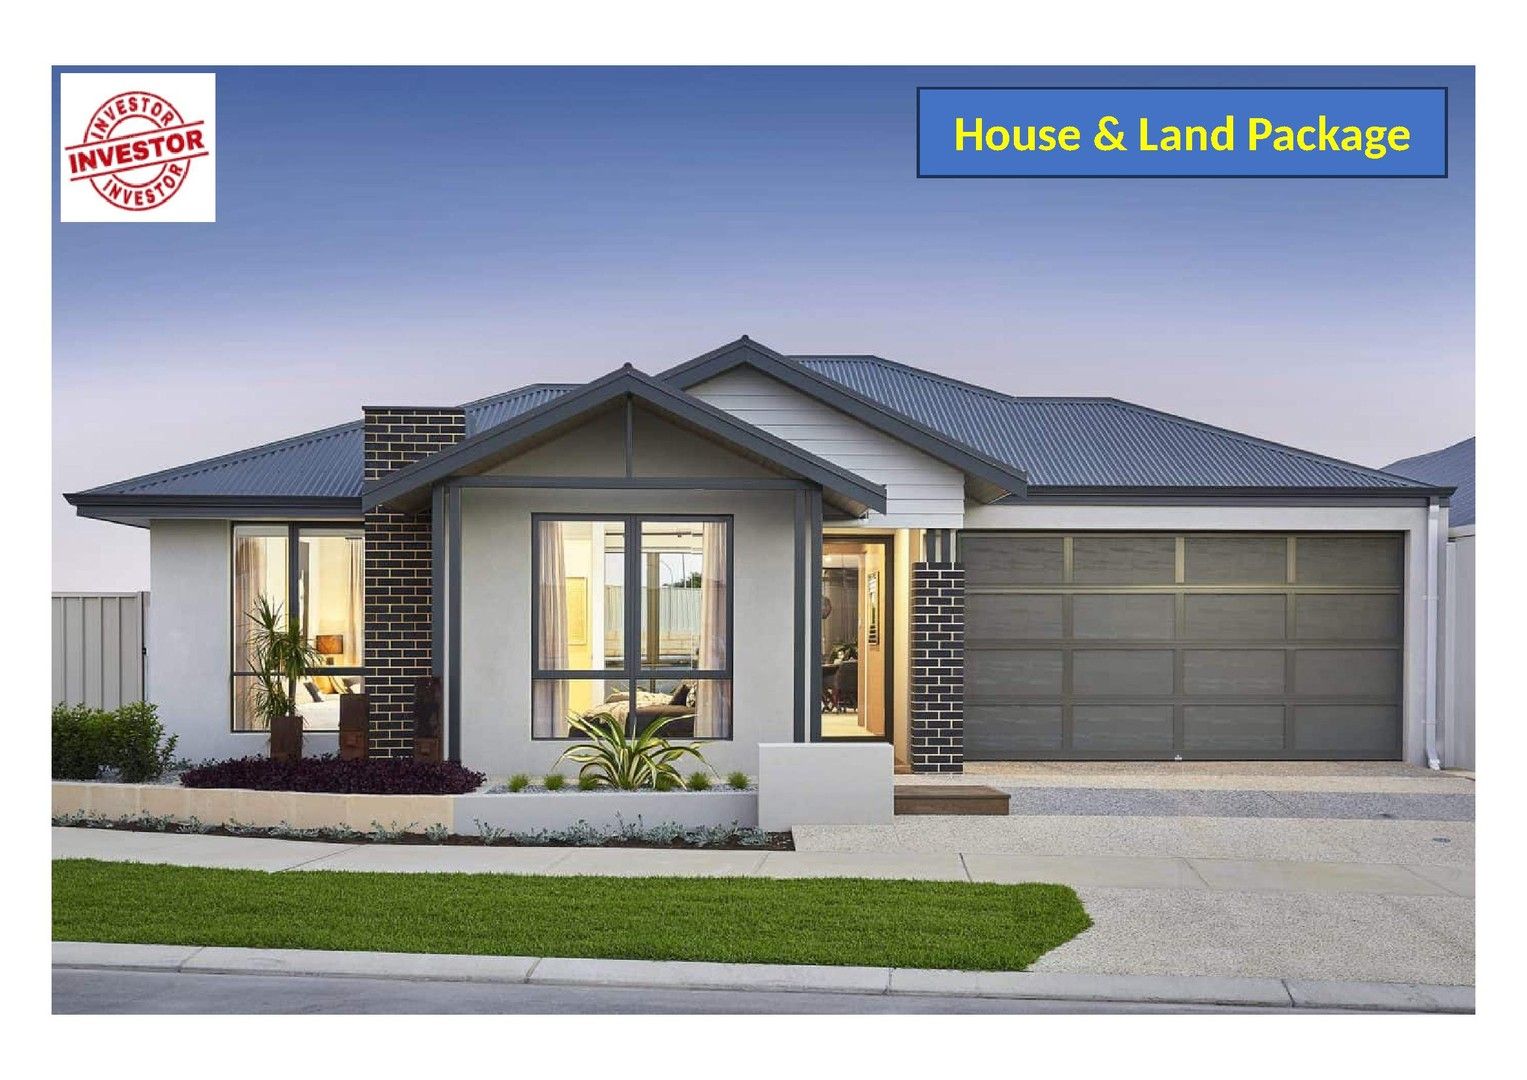 5 bedrooms New House & Land in Lot 677 Kendinup Way MIDVALE WA, 6056